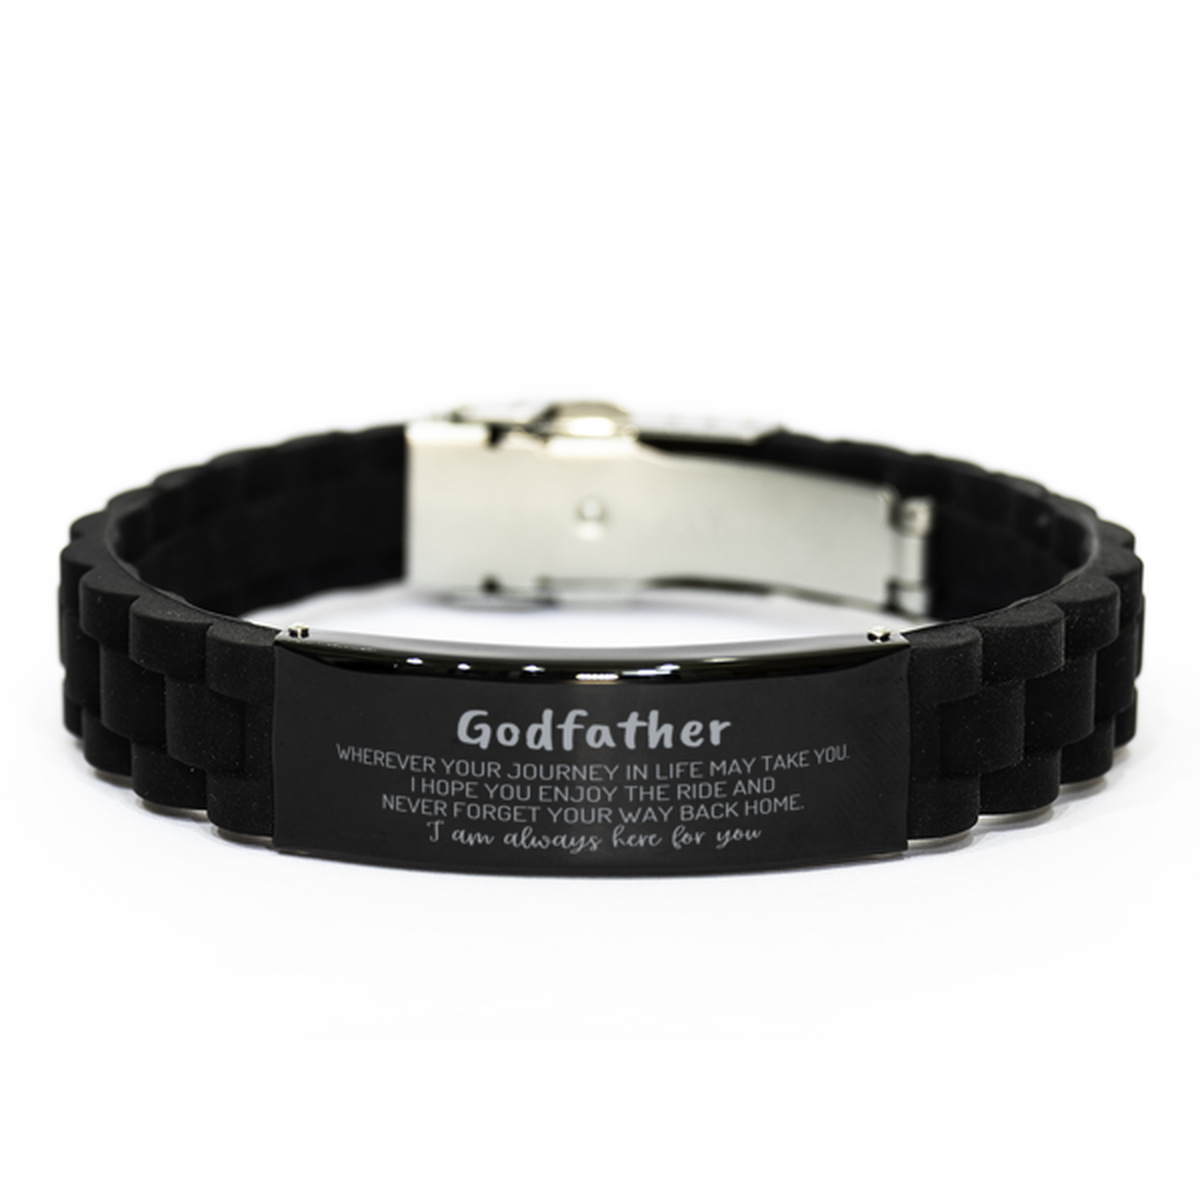 Godfather wherever your journey in life may take you, I am always here for you Godfather Black Glidelock Clasp Bracelet, Awesome Christmas Gifts For Godfather, Godfather Birthday Gifts for Men Women Family Loved One